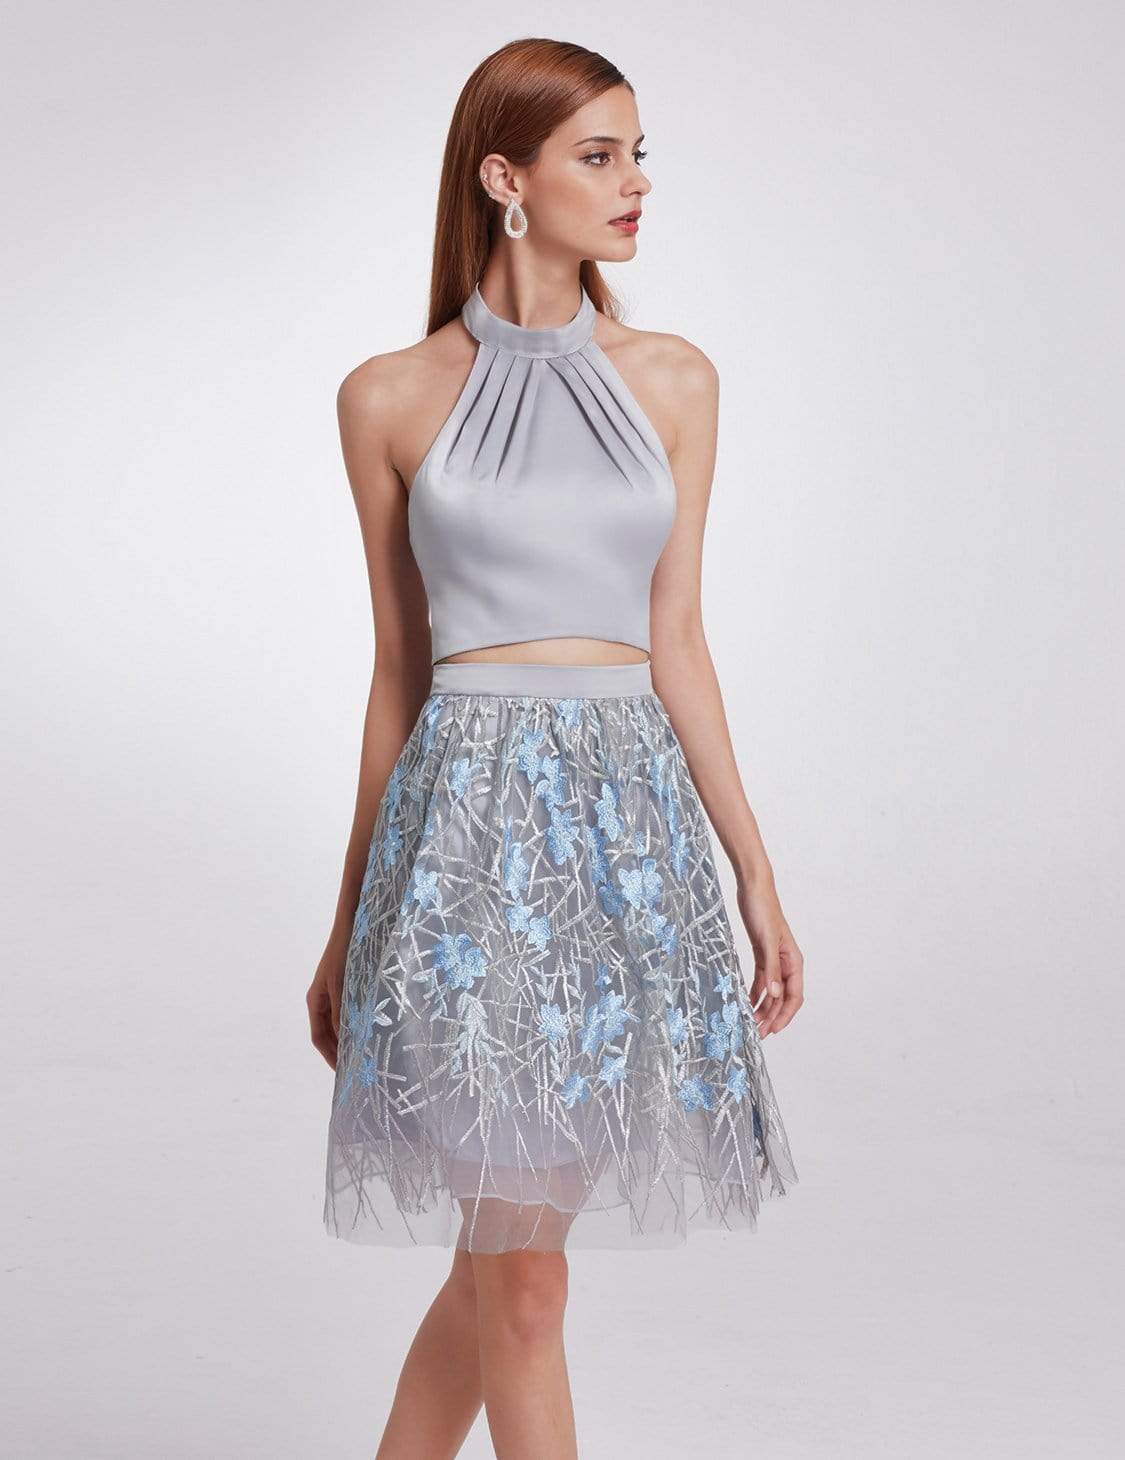 formal crop top and skirt